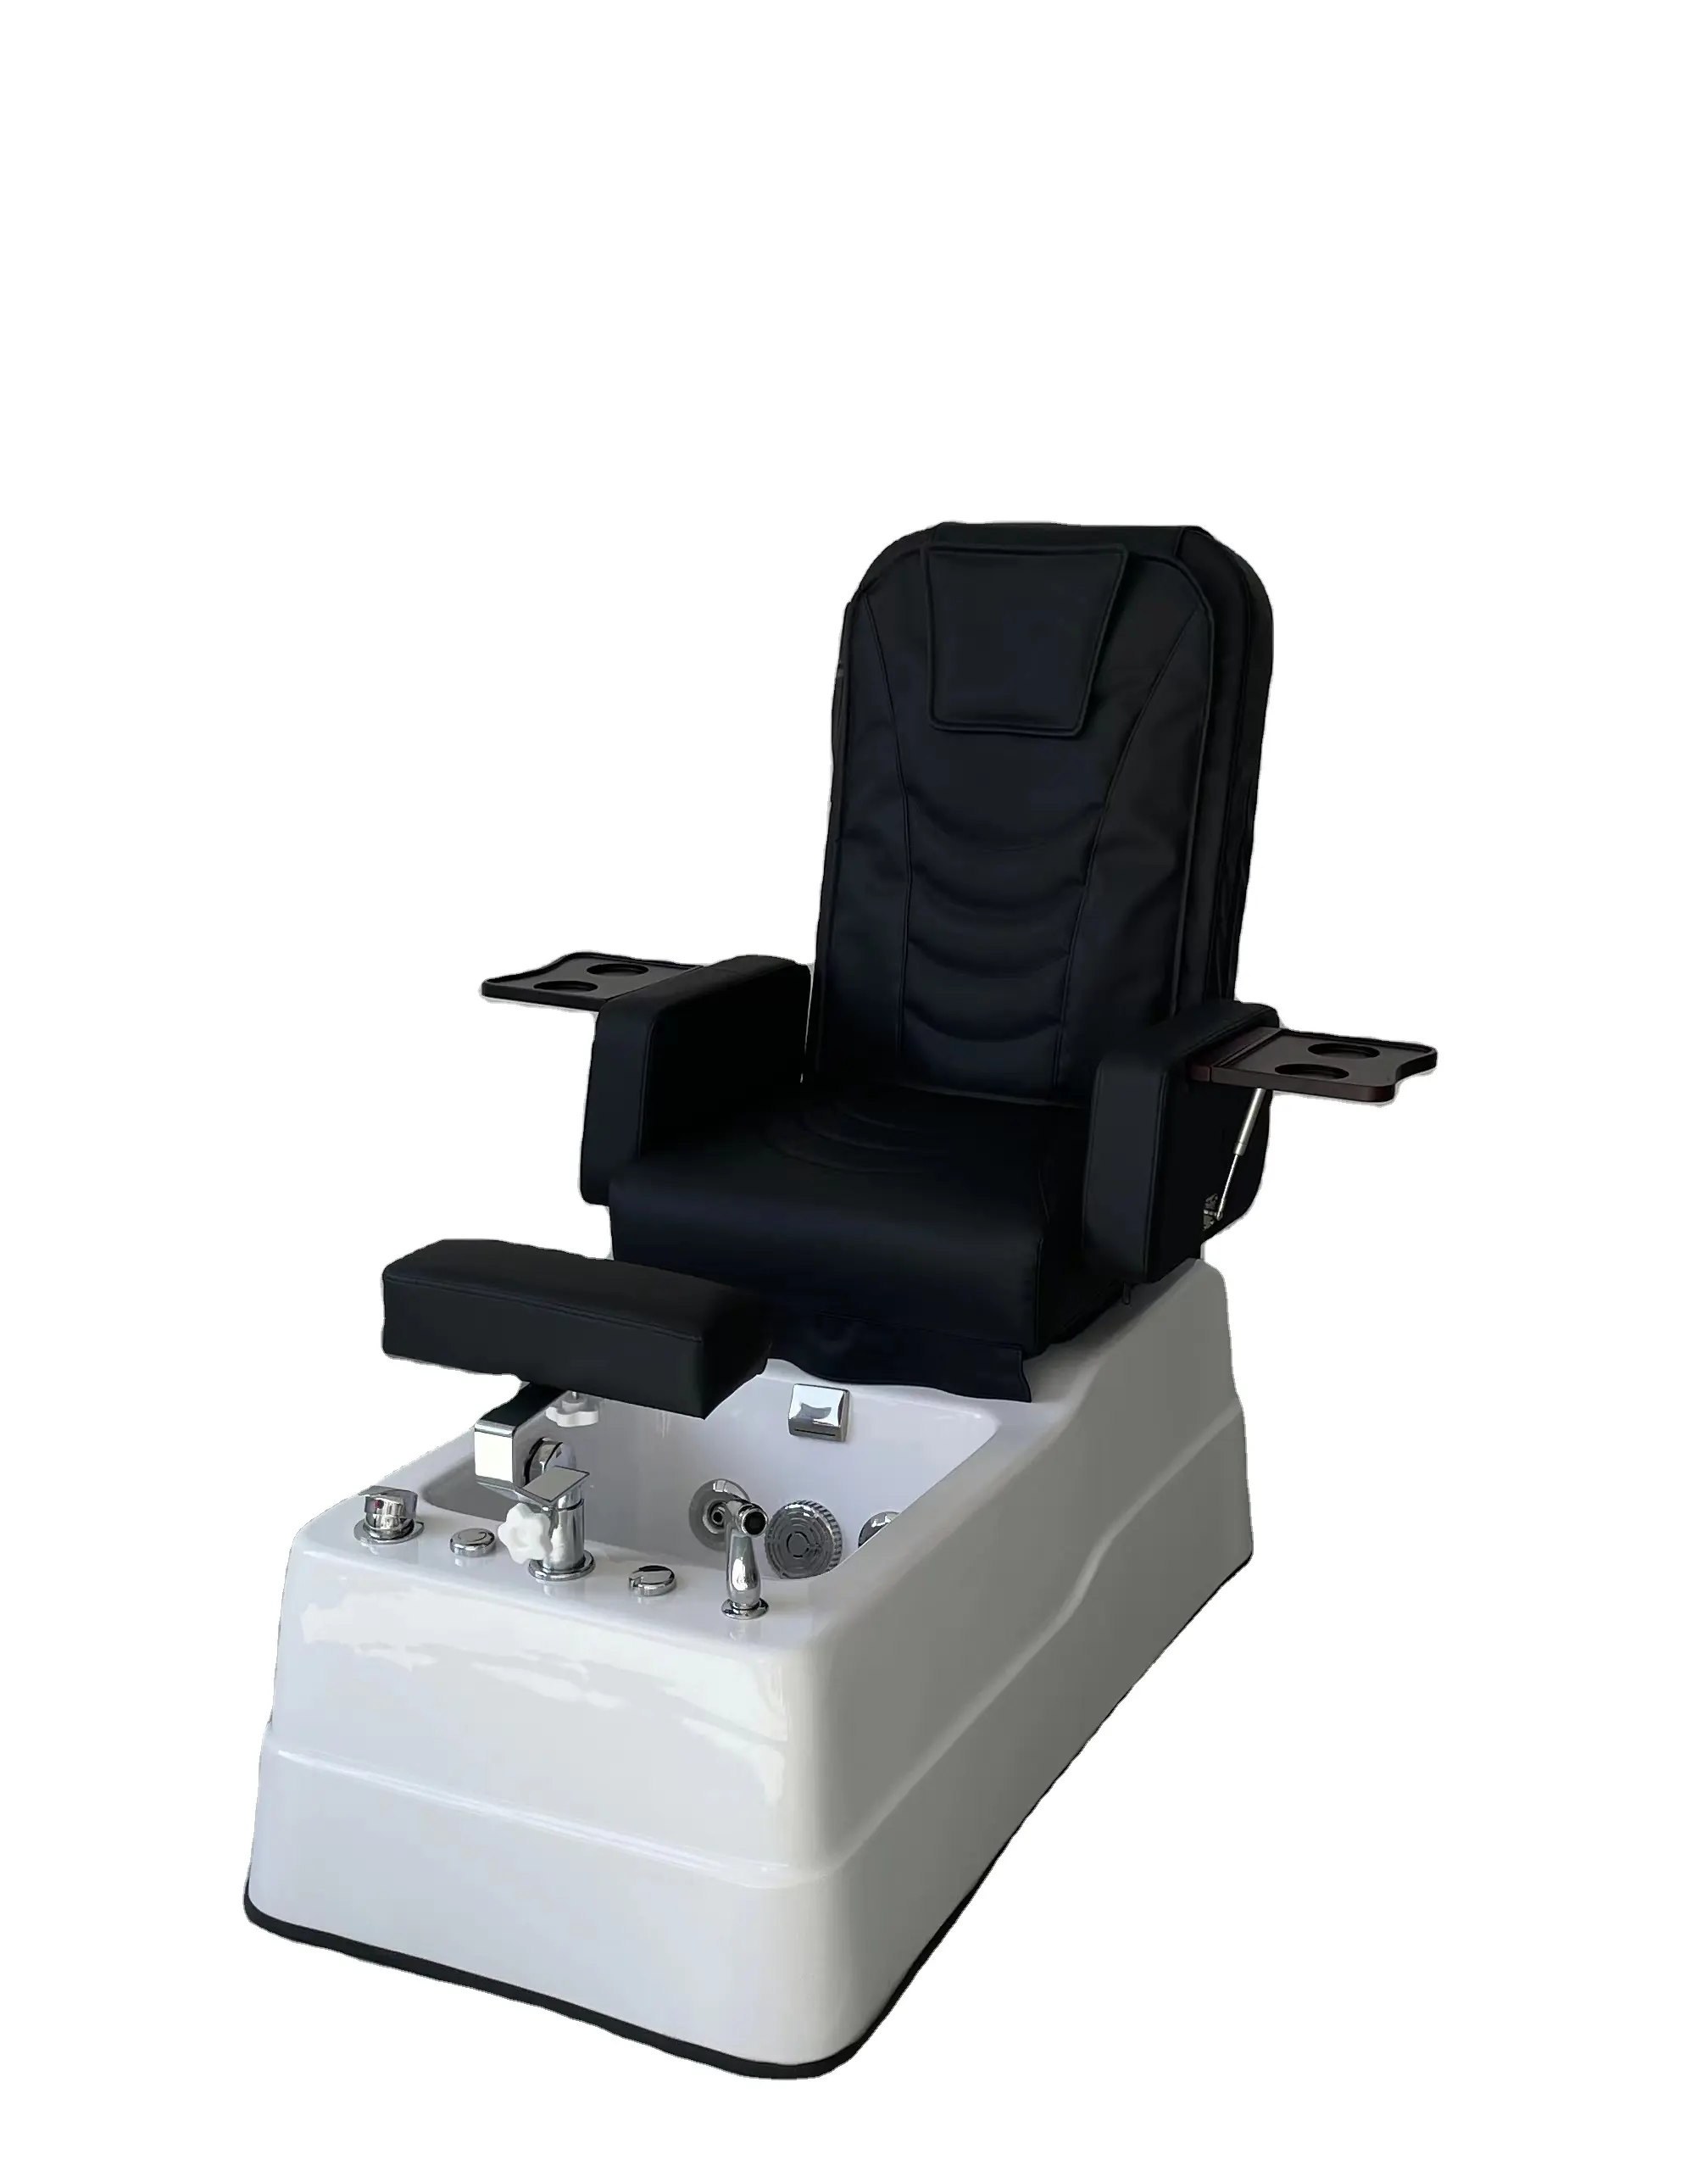 Black Luxury Foot Massage Chair With Simulation Massage Sofa Spa Manicure Pedicure Chair